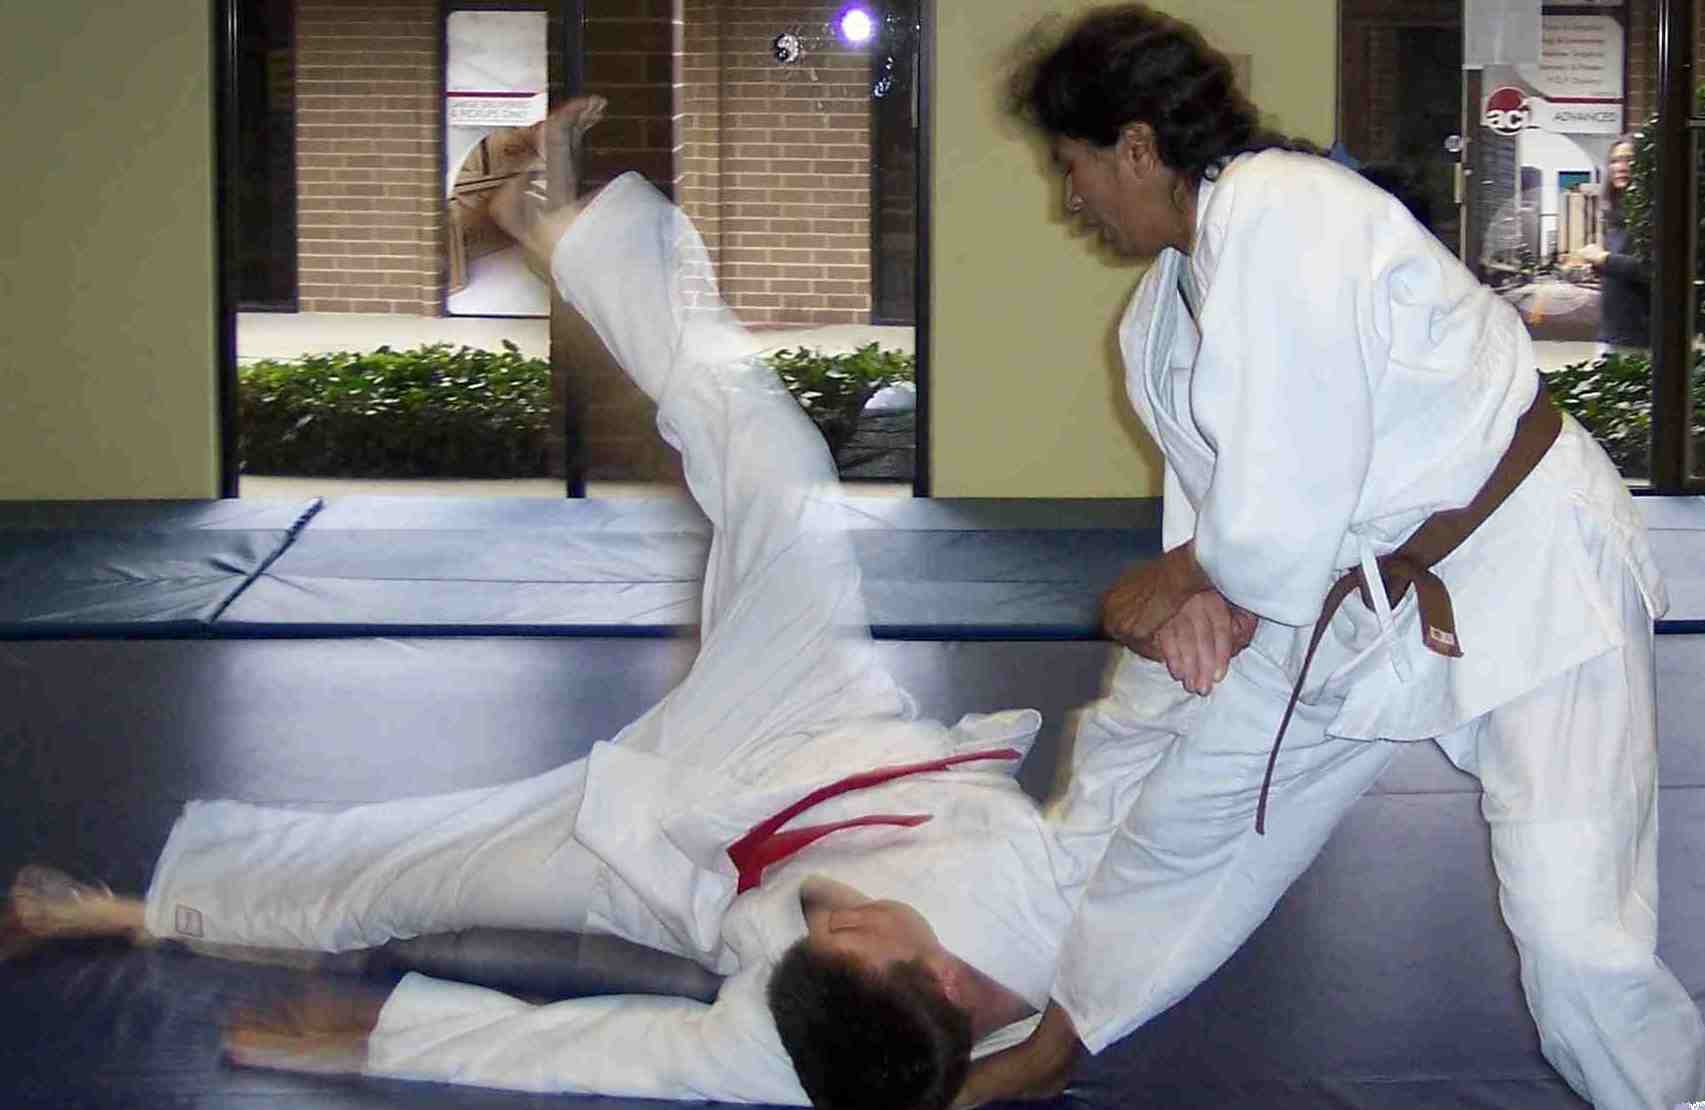 Description: Description: Description: Description: F:\Internet\hapkido\pictures_files\throw1.jpg